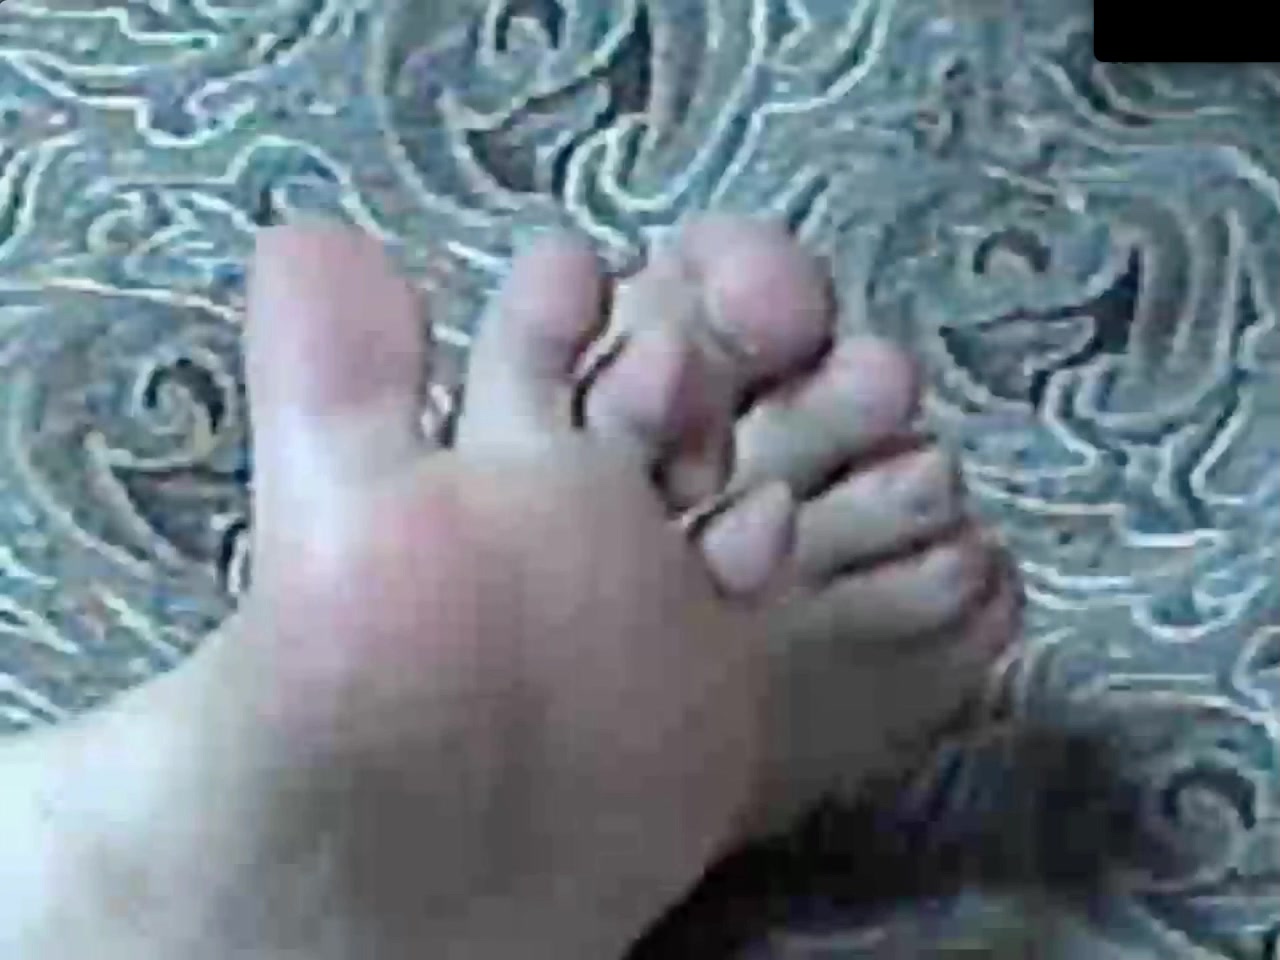 russian daddy up close toe wiggling & spreading